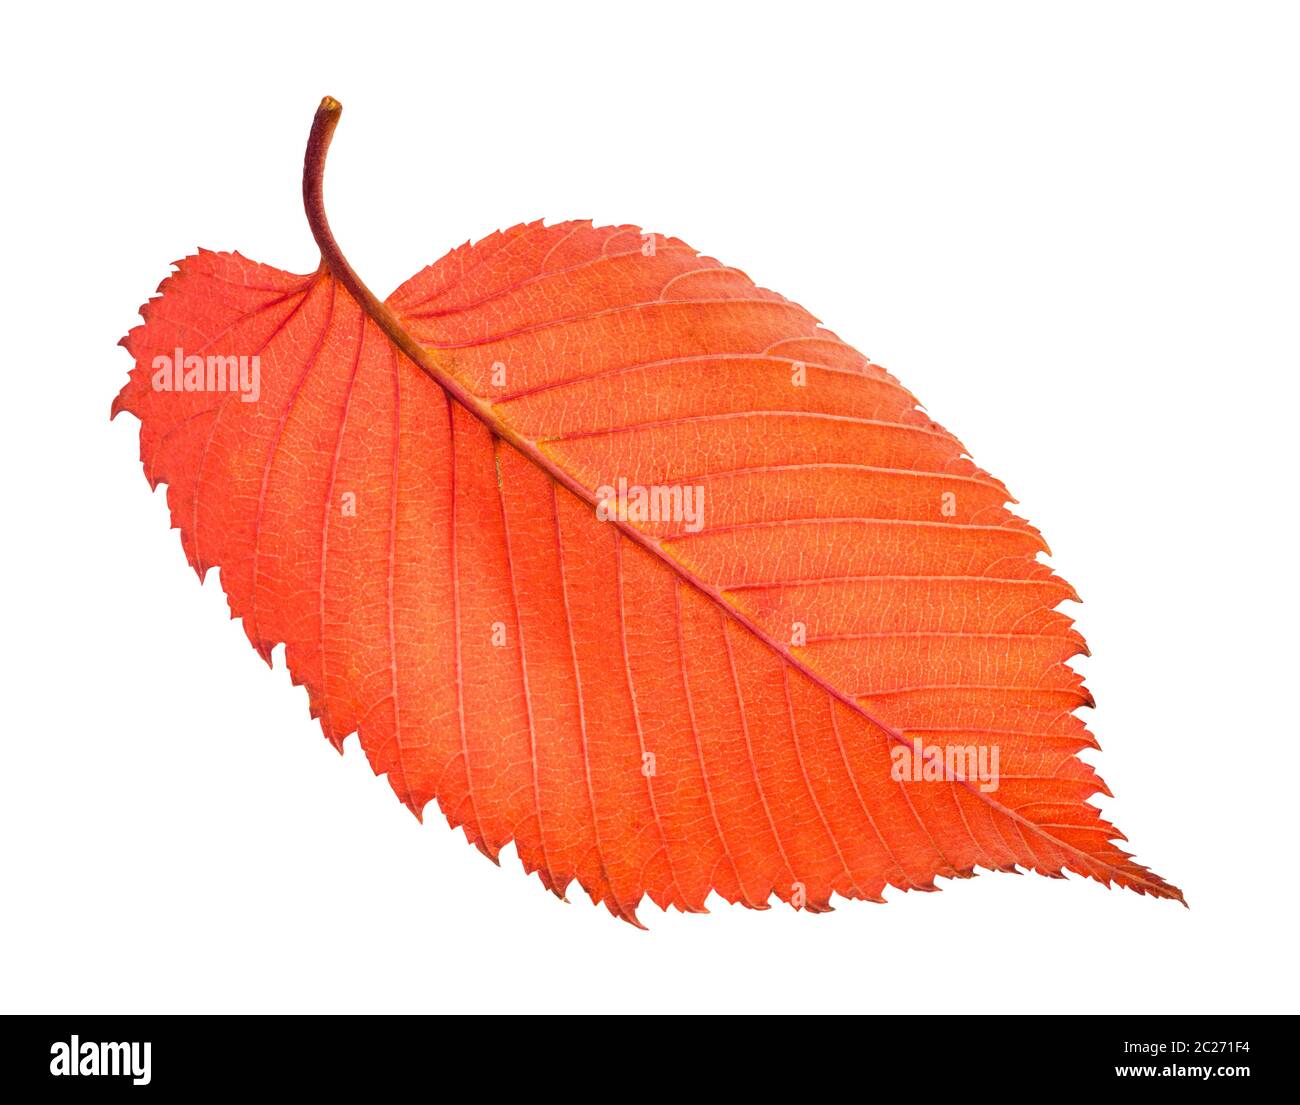 Stately Elm High Resolution Stock Photography and Images - Alamy